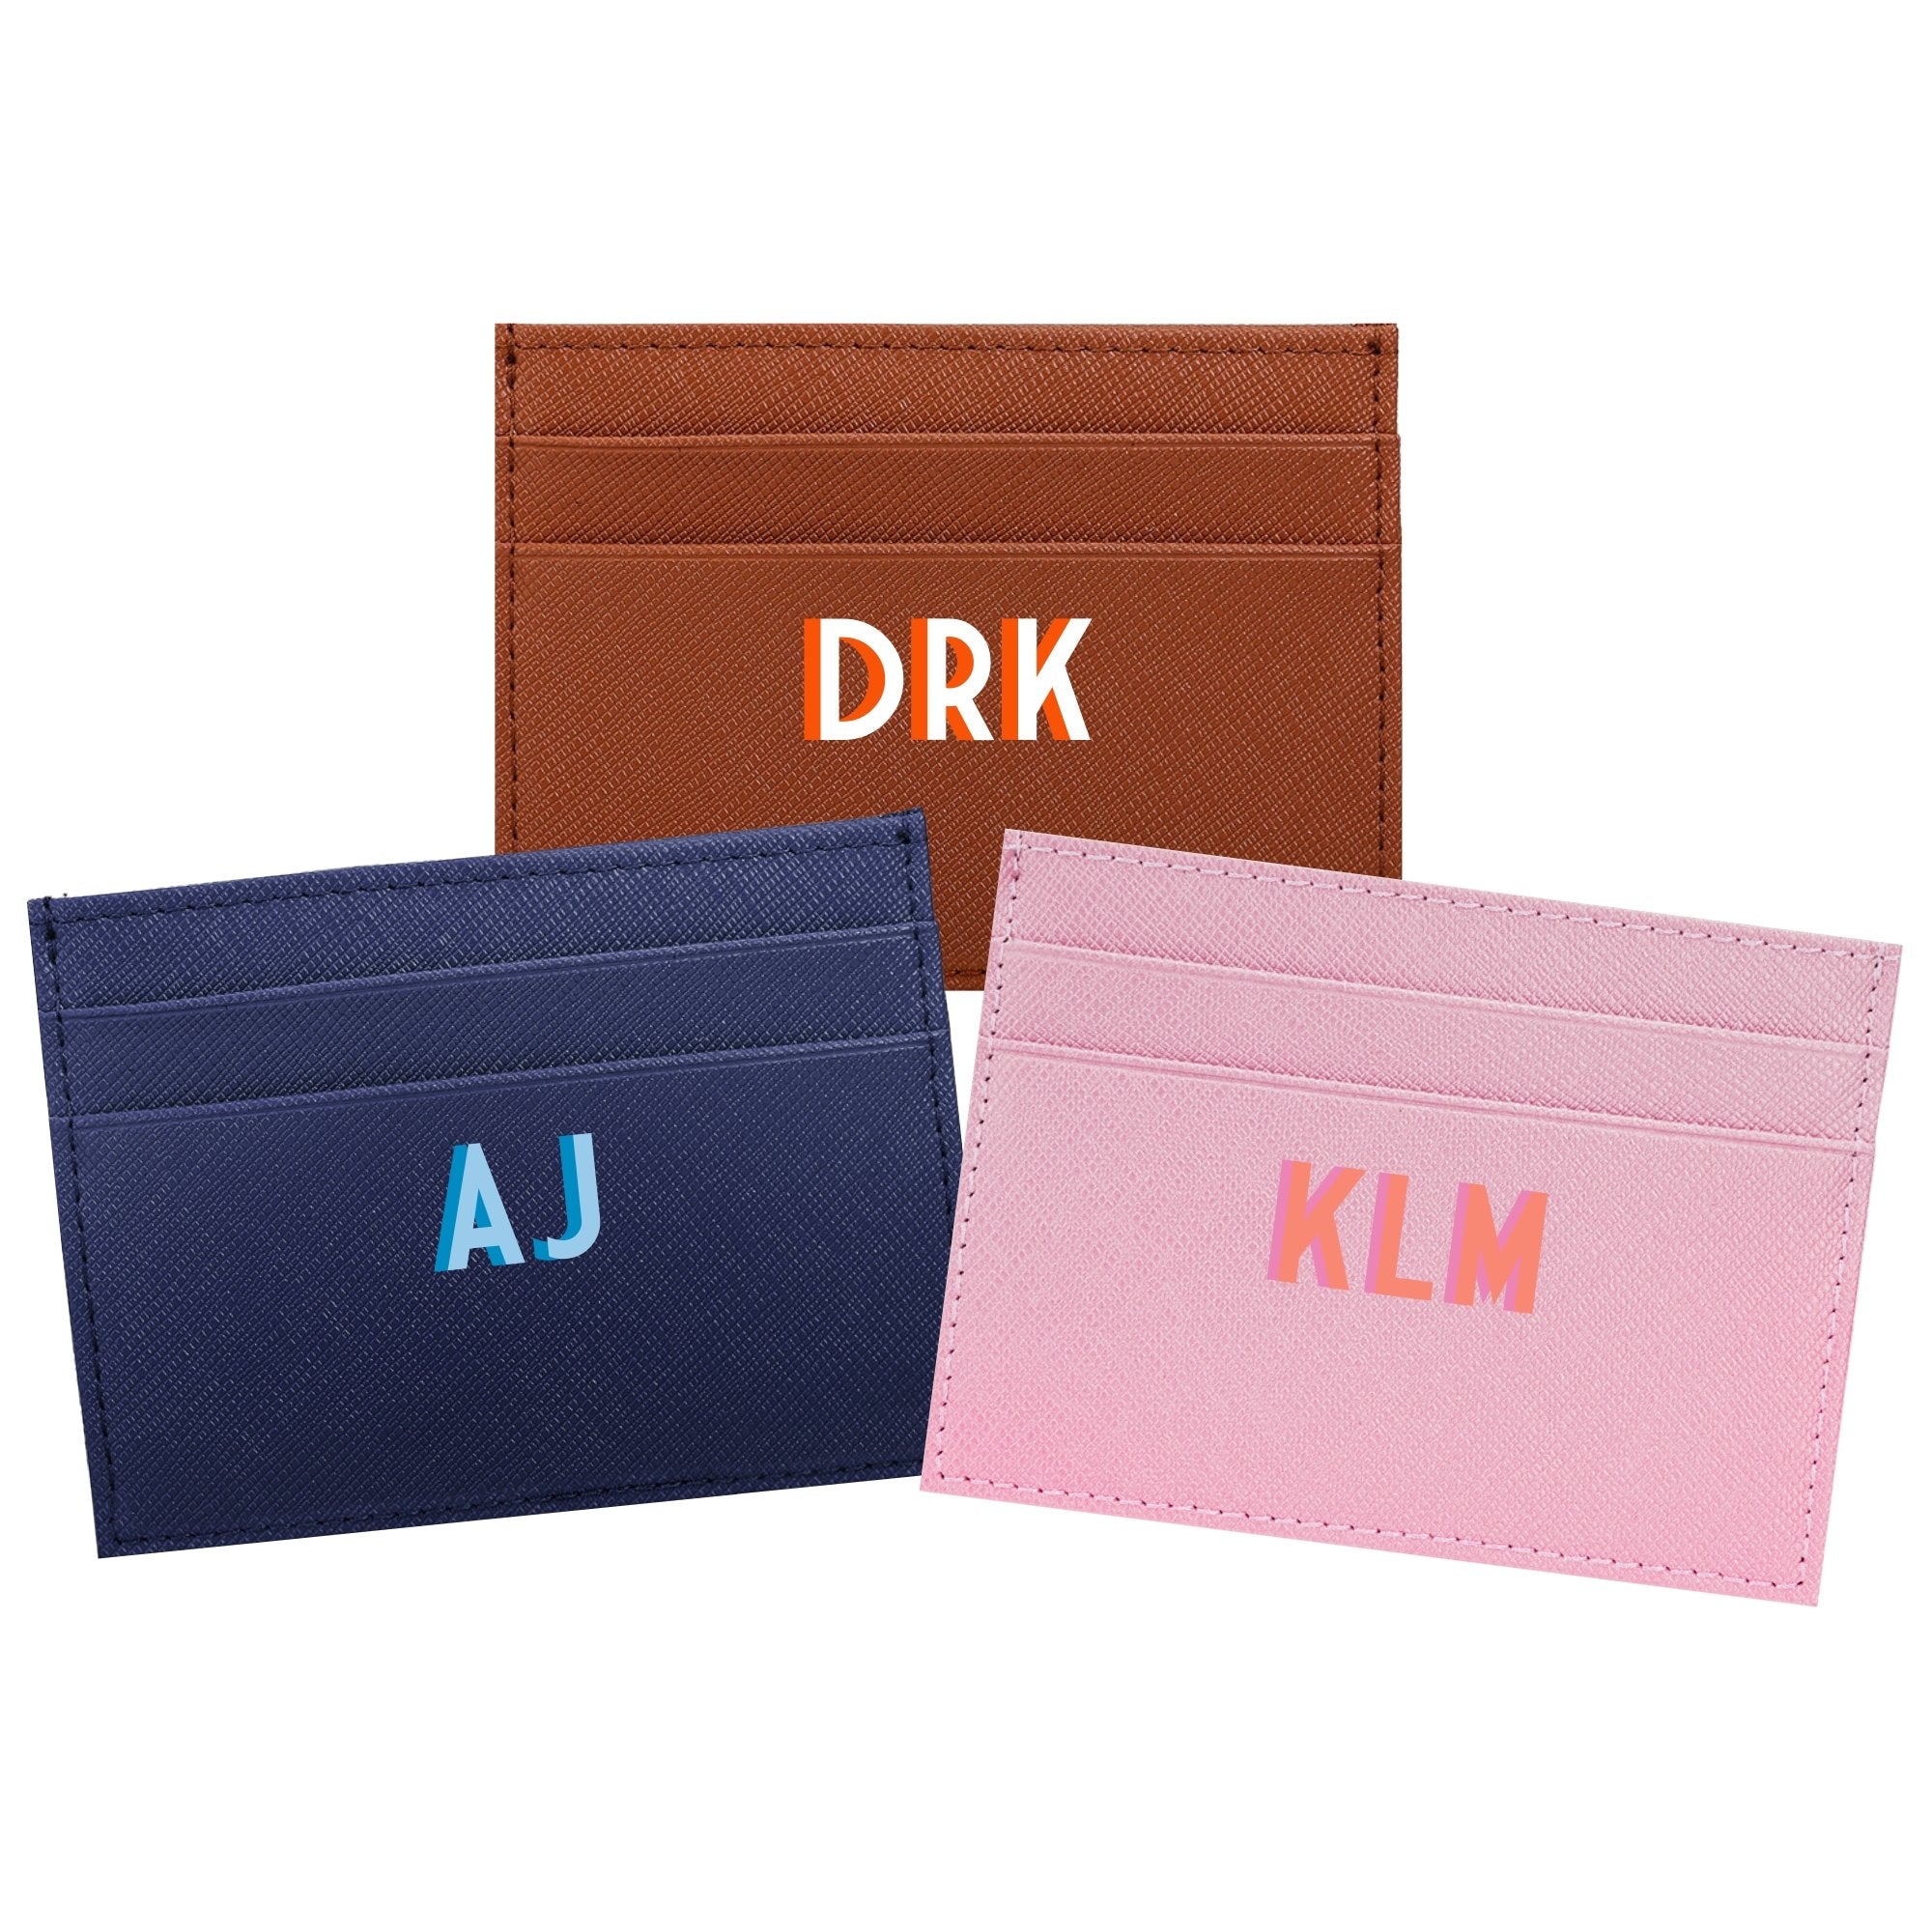 Shadow Monogram Leather Cardholder - Sprinkled With Pink #bachelorette #custom #gifts